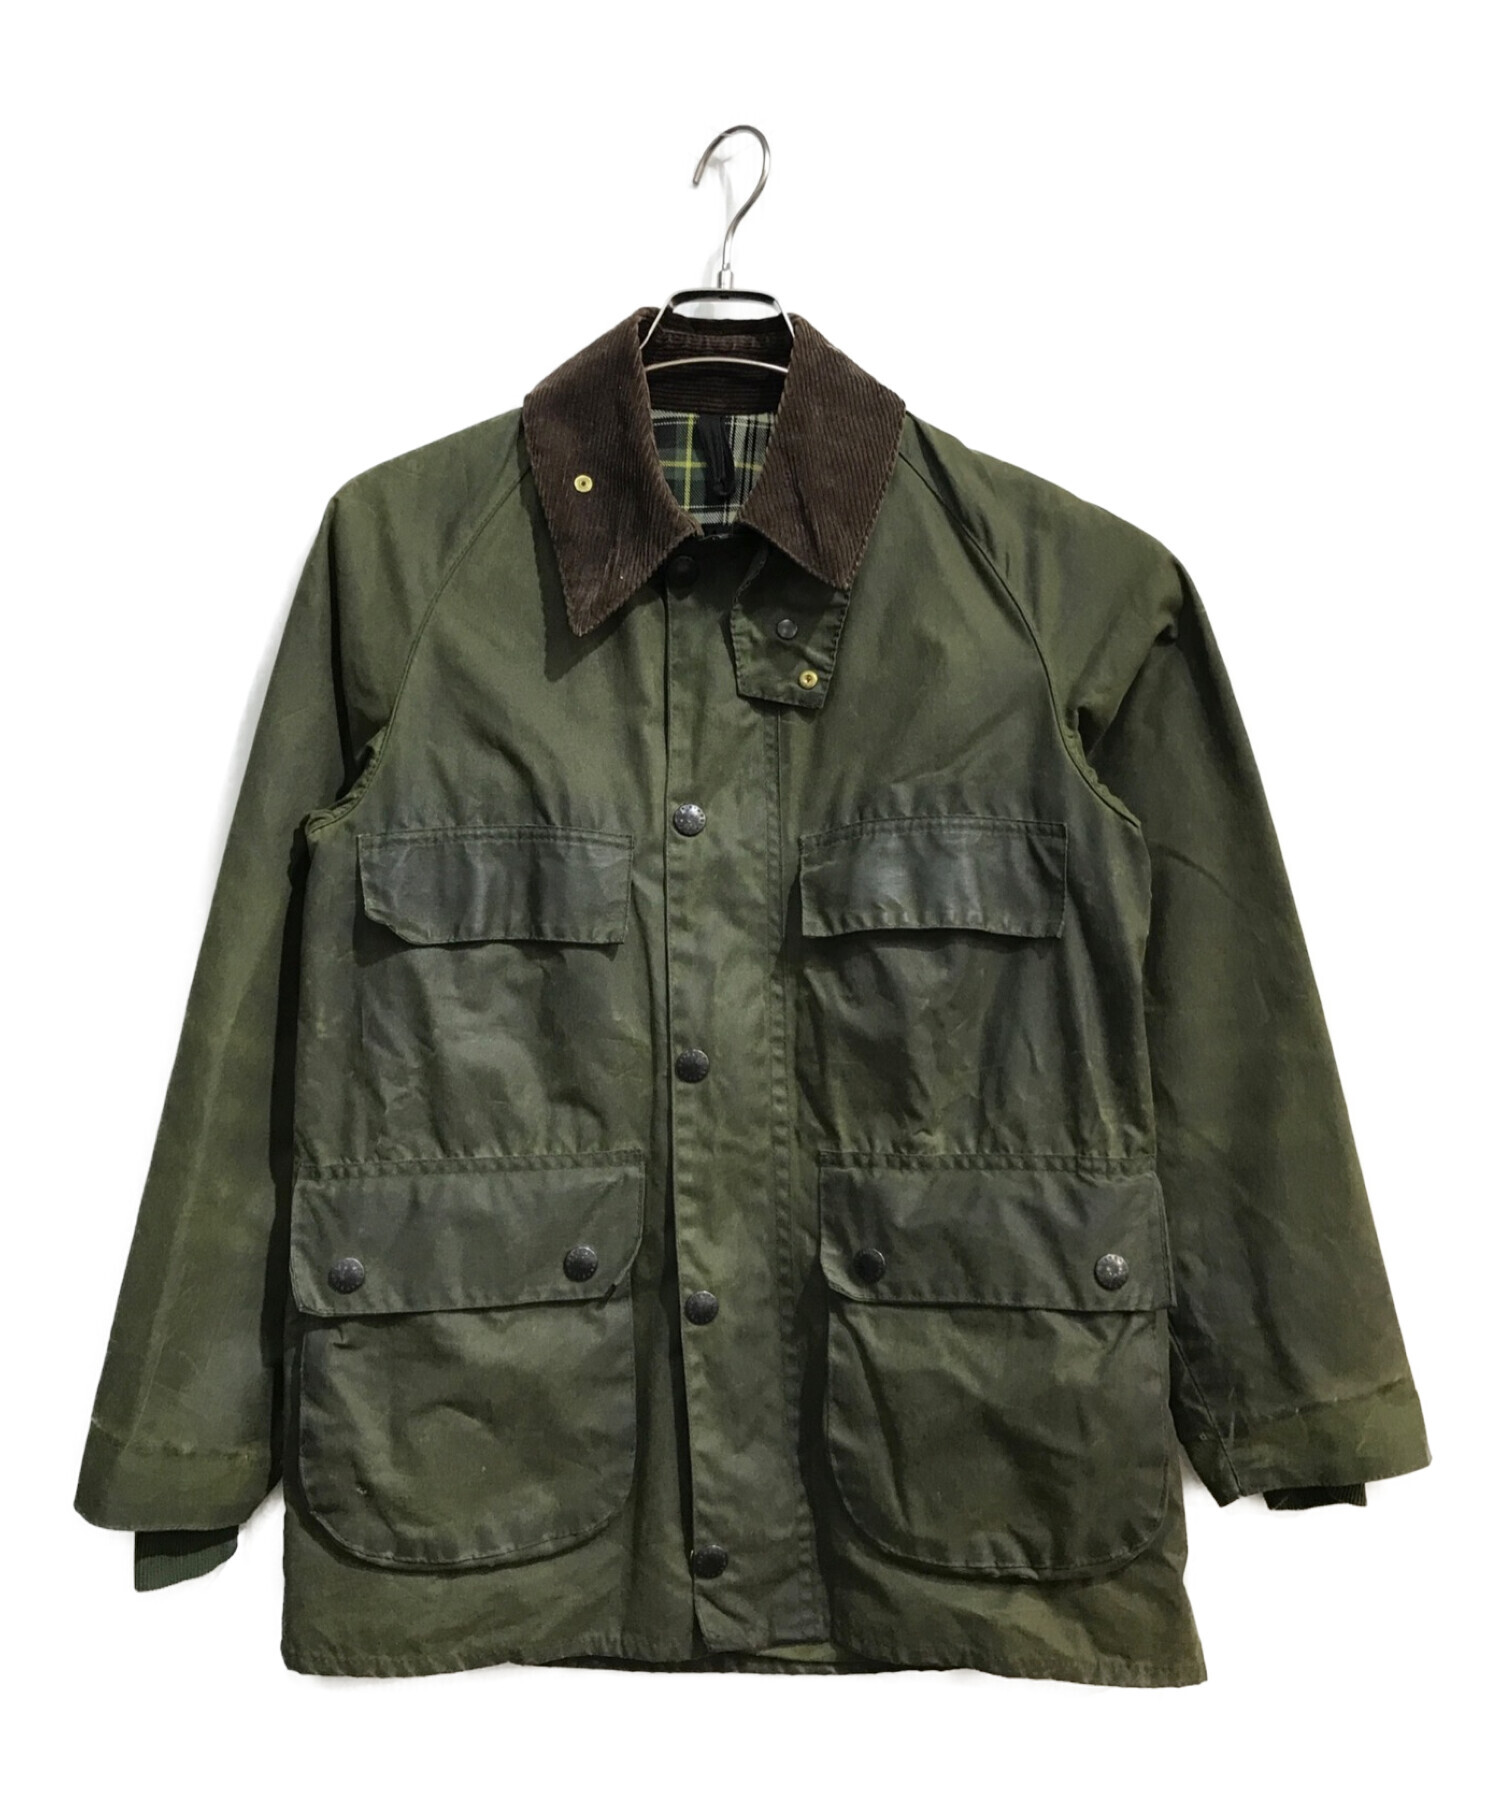 80s Barbour bedale c38◎Mint ビデイル 2クレスト-